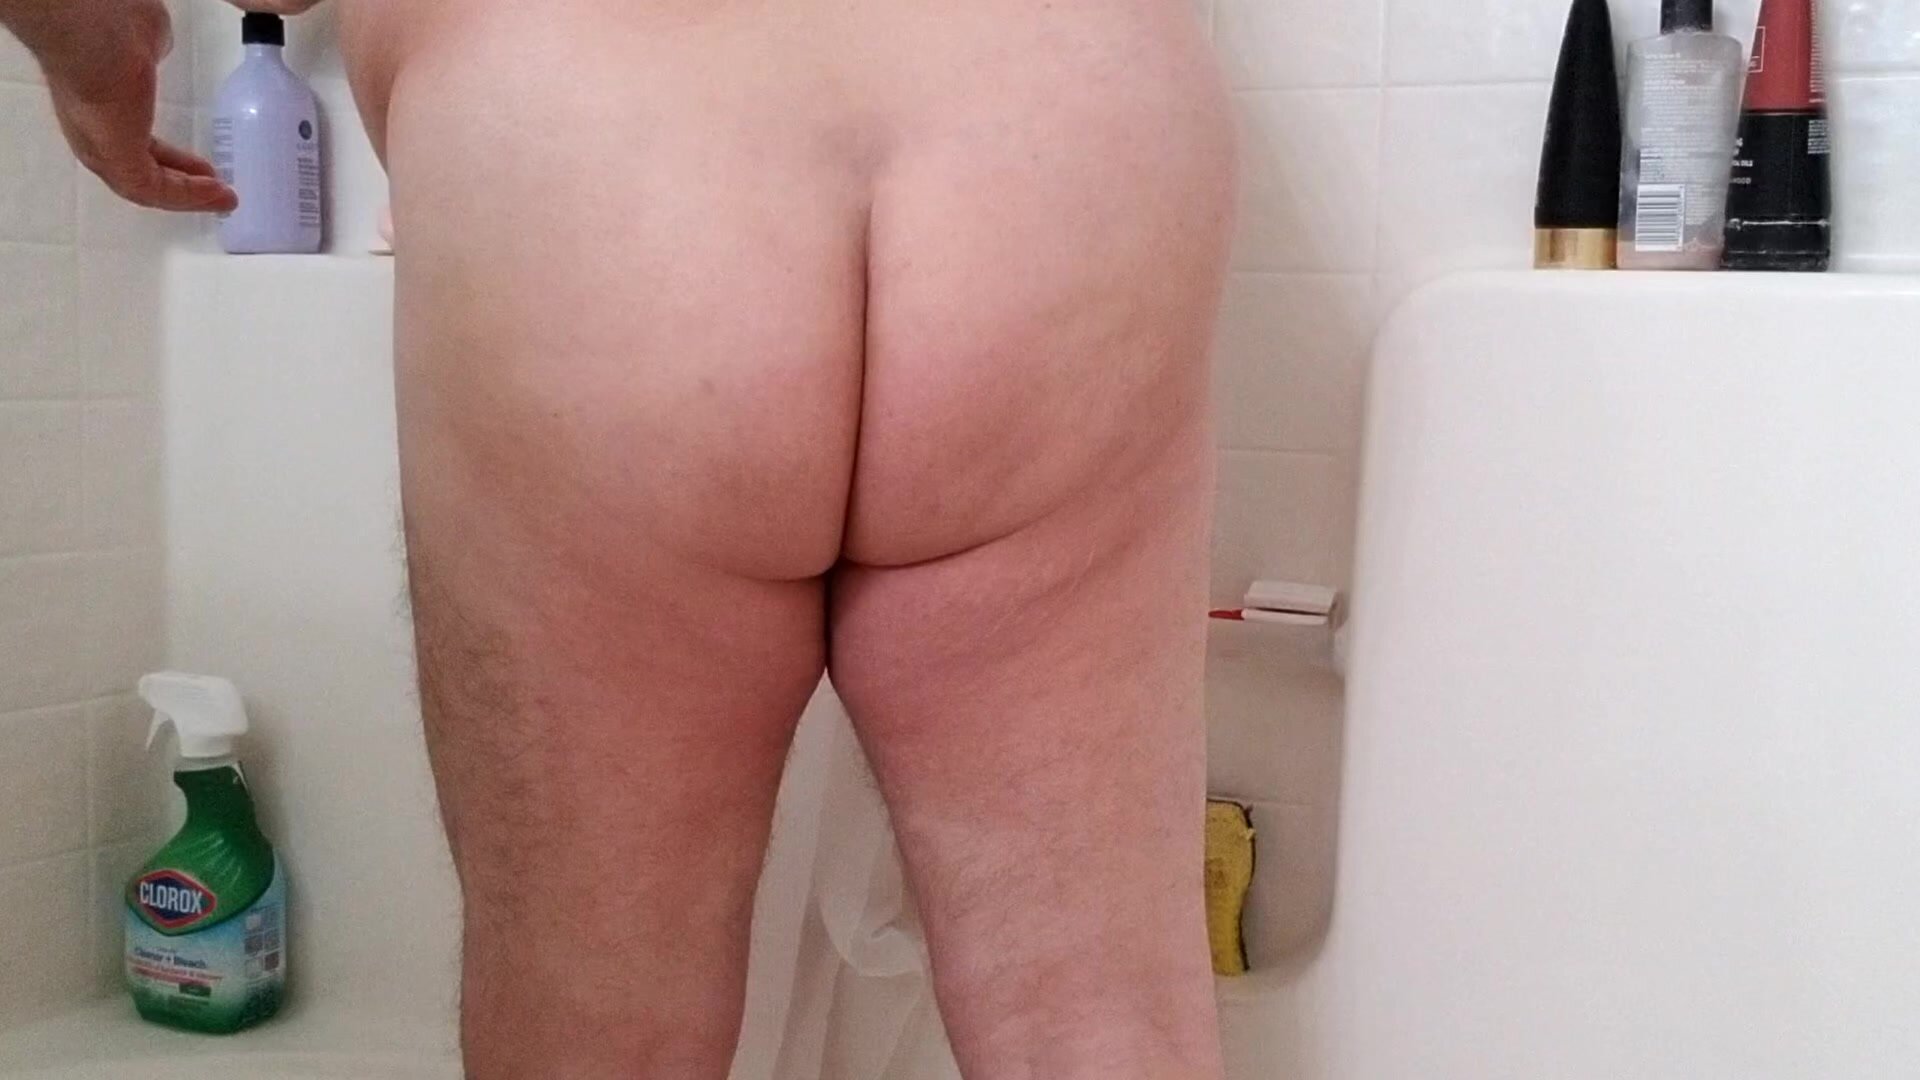 Poop and Play 32 - Showering (Camera 1) - Part 1 of 2